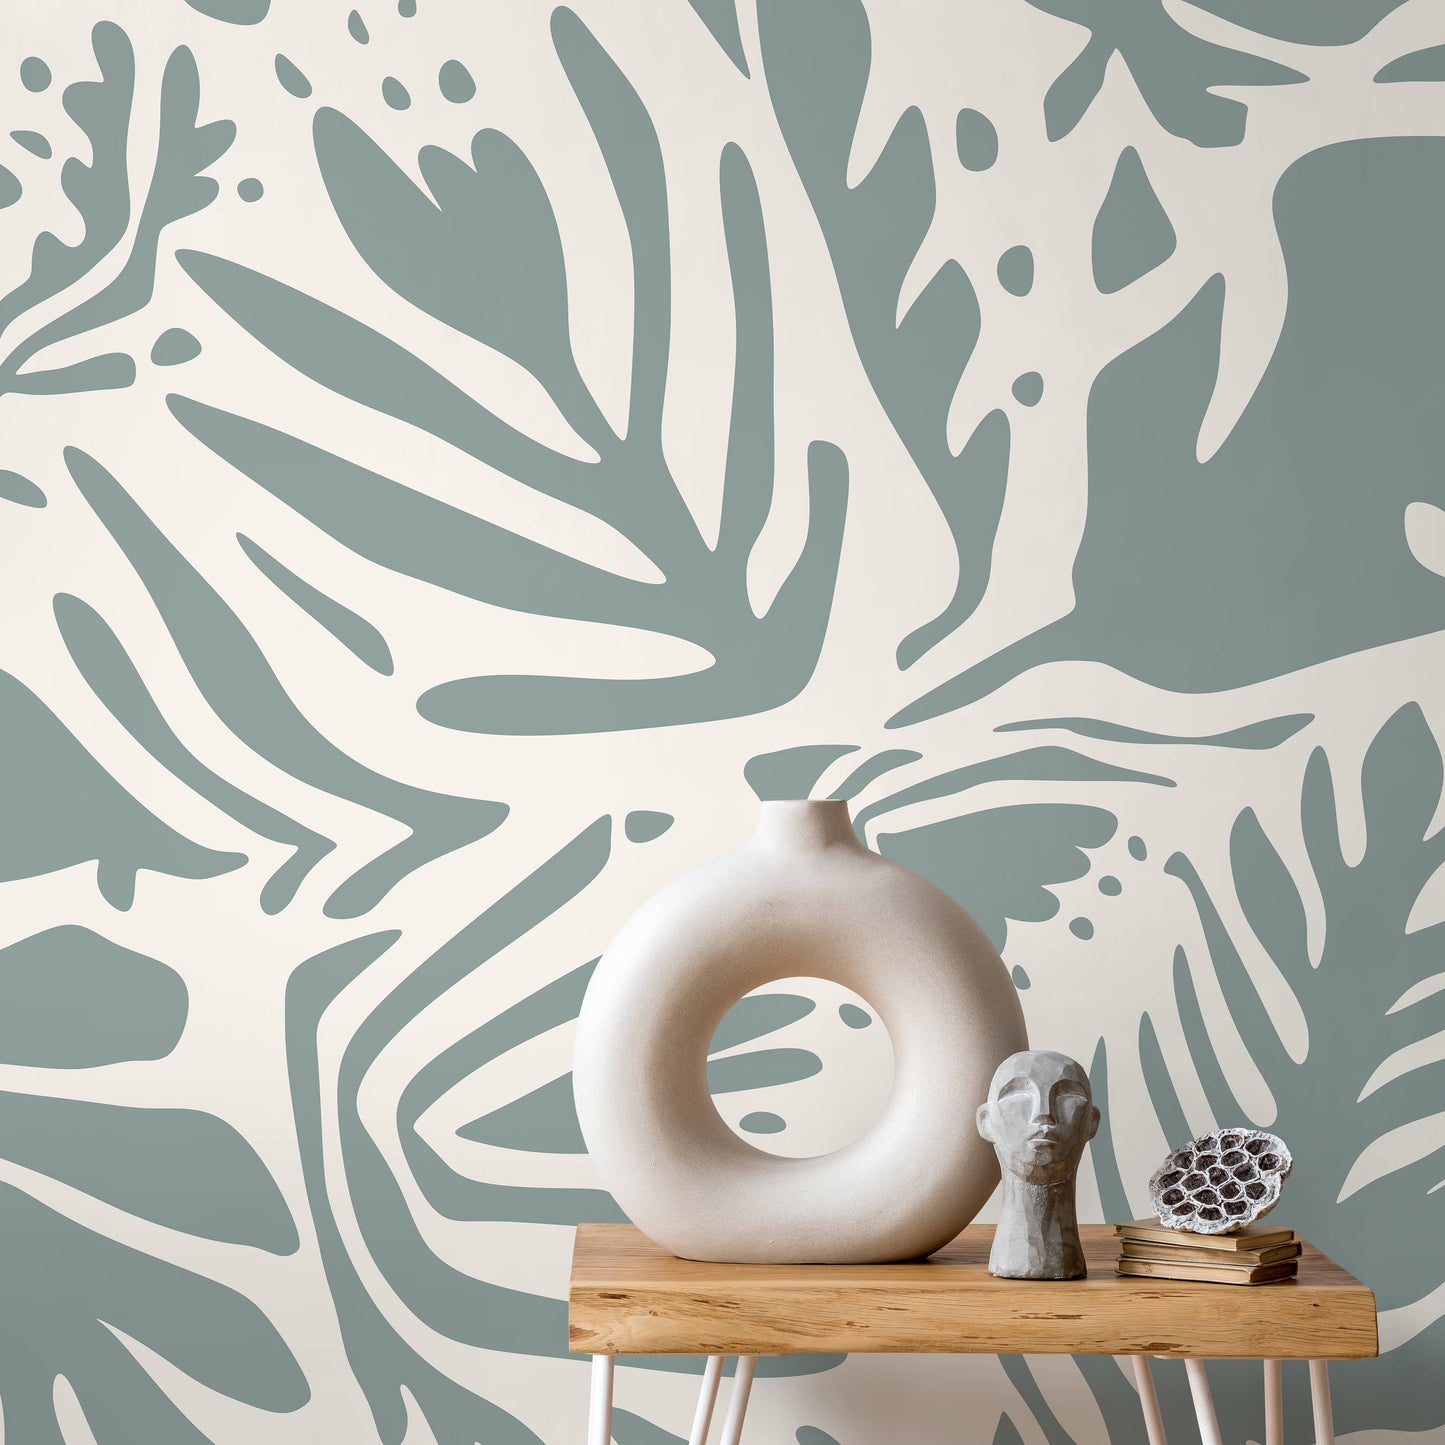 Light Green Leaf Abstract Wallpaper Boho Wallpaper Peel and Stick and Traditional Wallpaper - D664